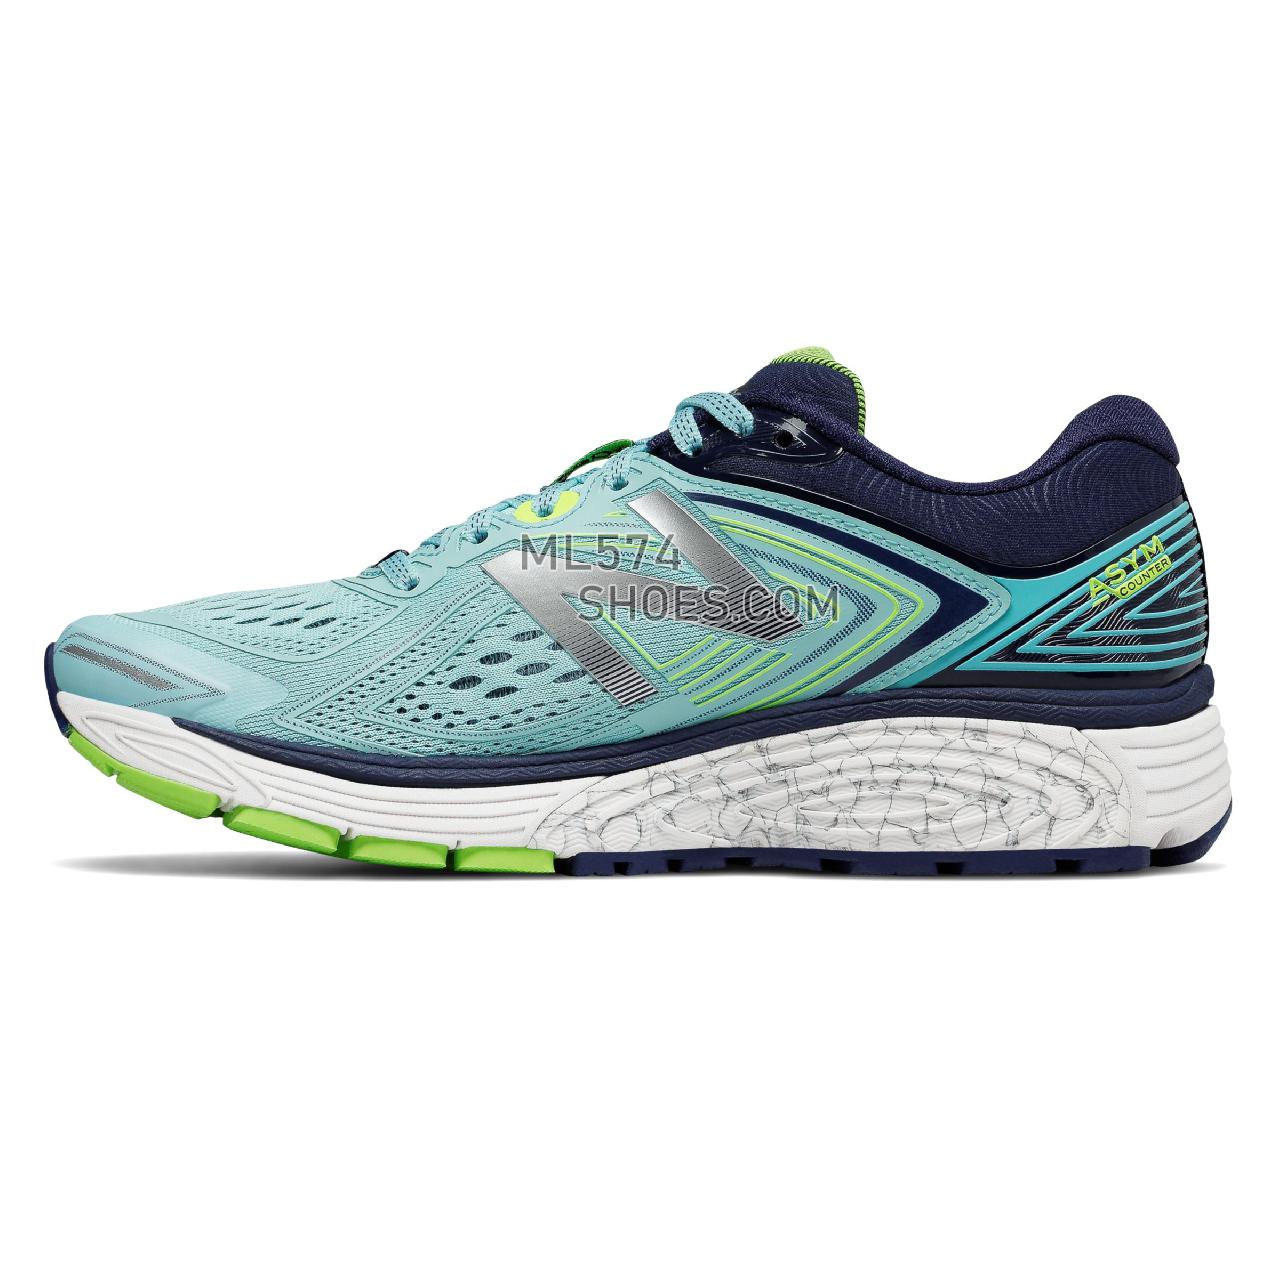 New Balance 860v8 - Women's 860 - Running Sea Spray with Pigment and Energy Lime - W860BN8